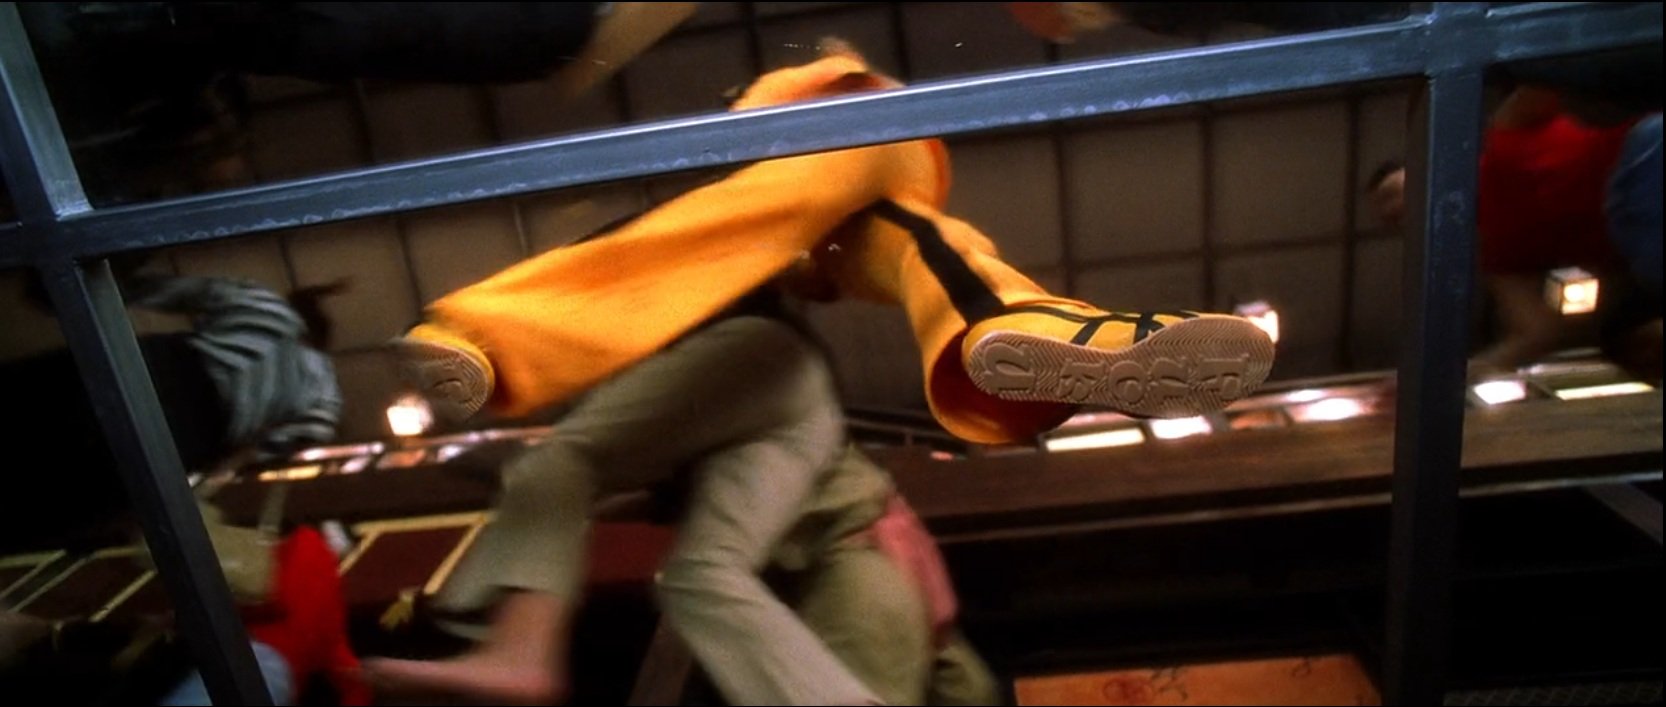 In Kill Bill look at the shoes. They say "f*ck you".